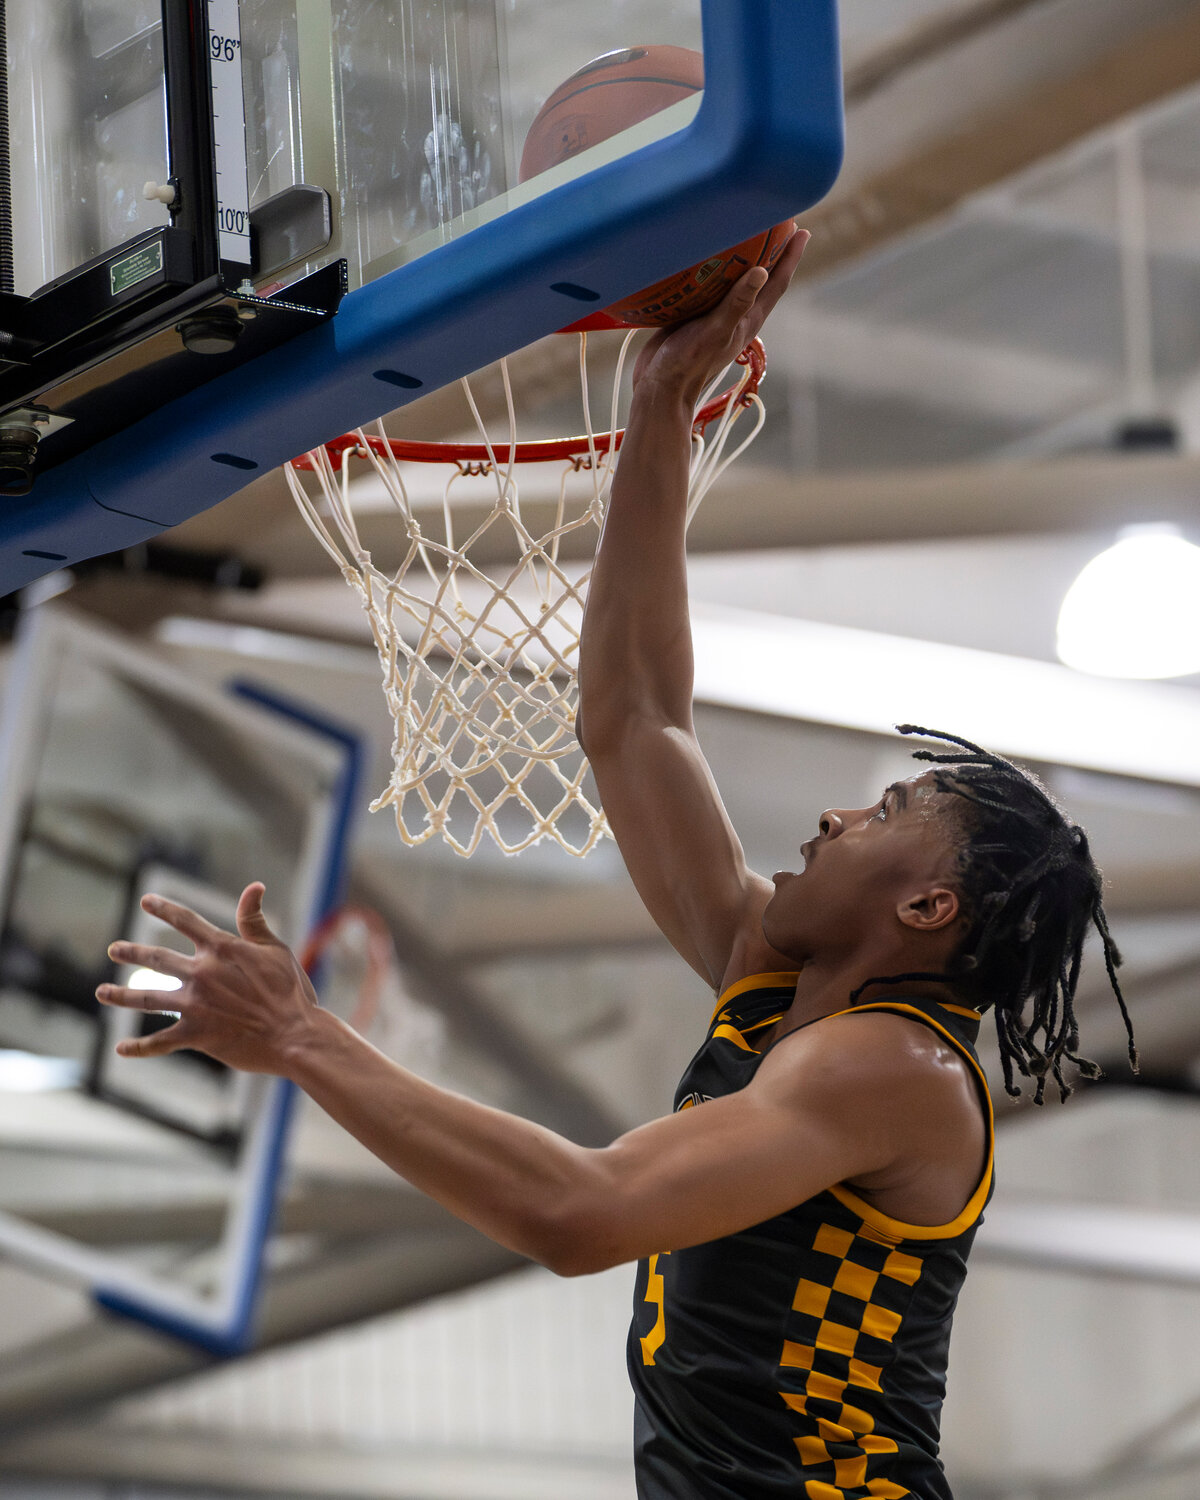 Archbishop Wood’s Josh Reed with an easy layup in the third quarter.